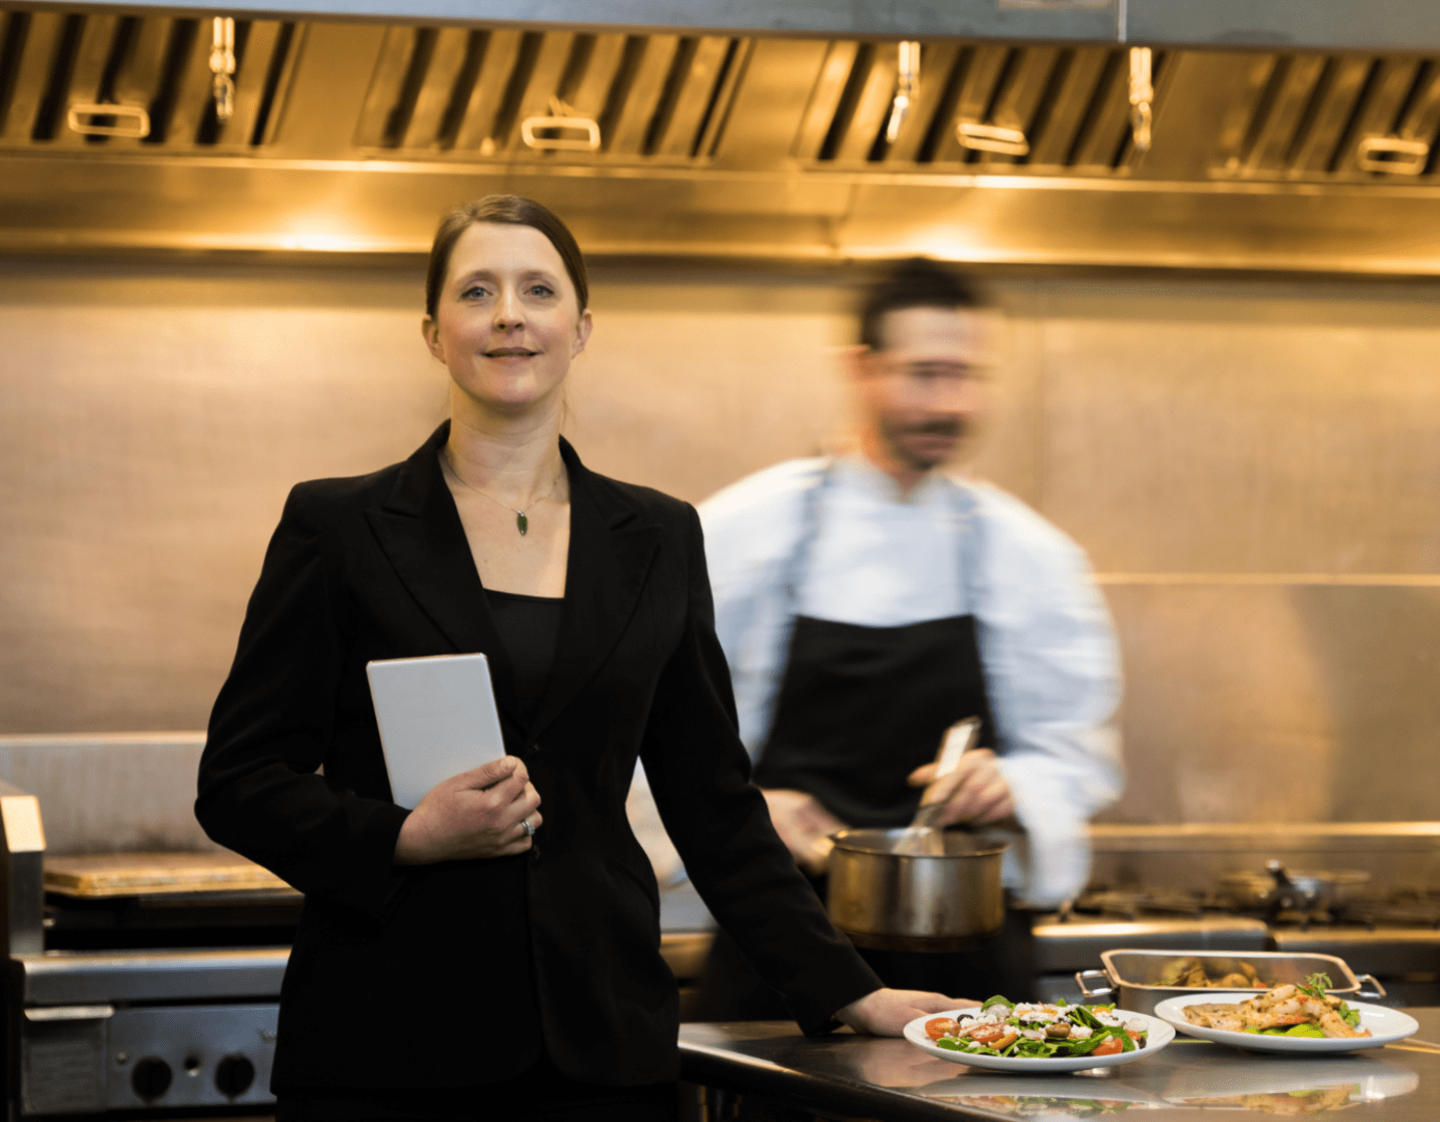 A woman in a suit, holding a notepad, in a restaurant kitchen